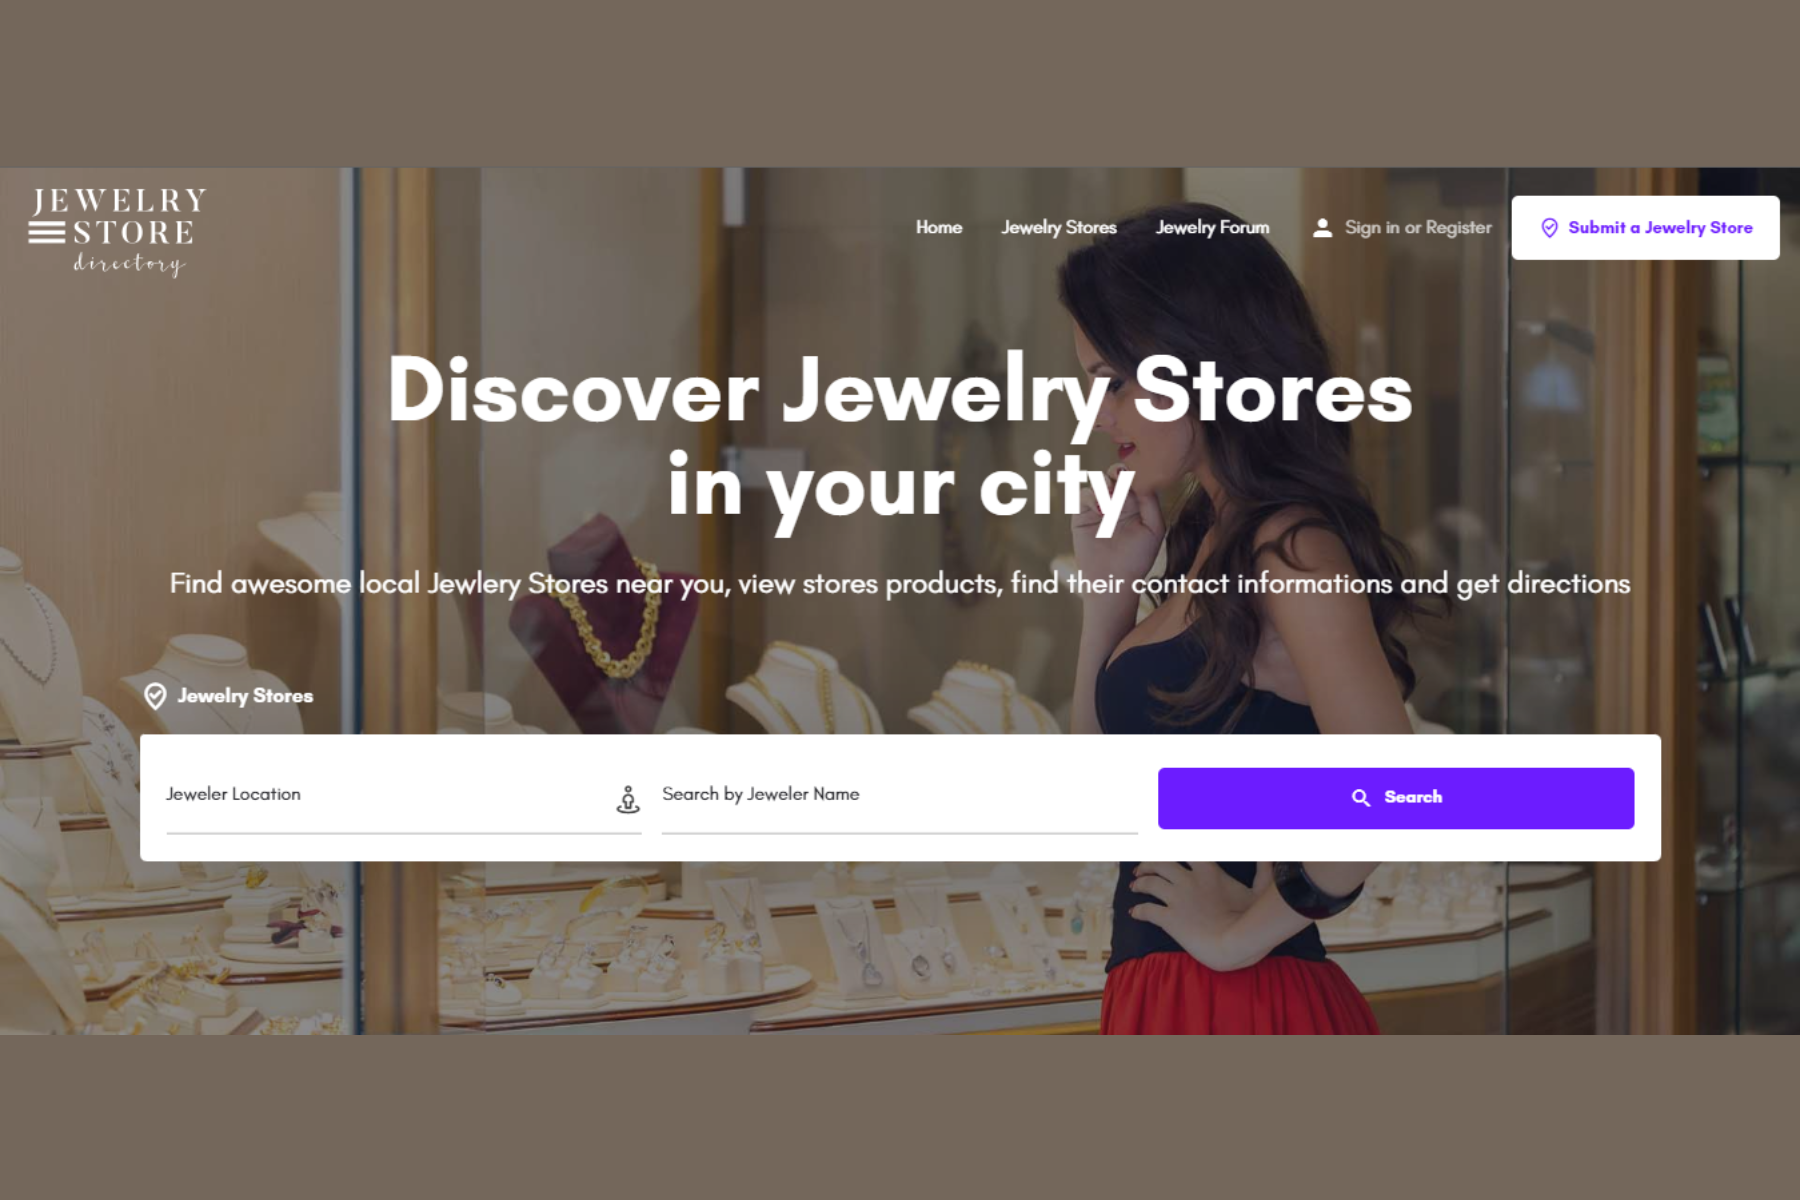 Website of the Jewelry Store Directory